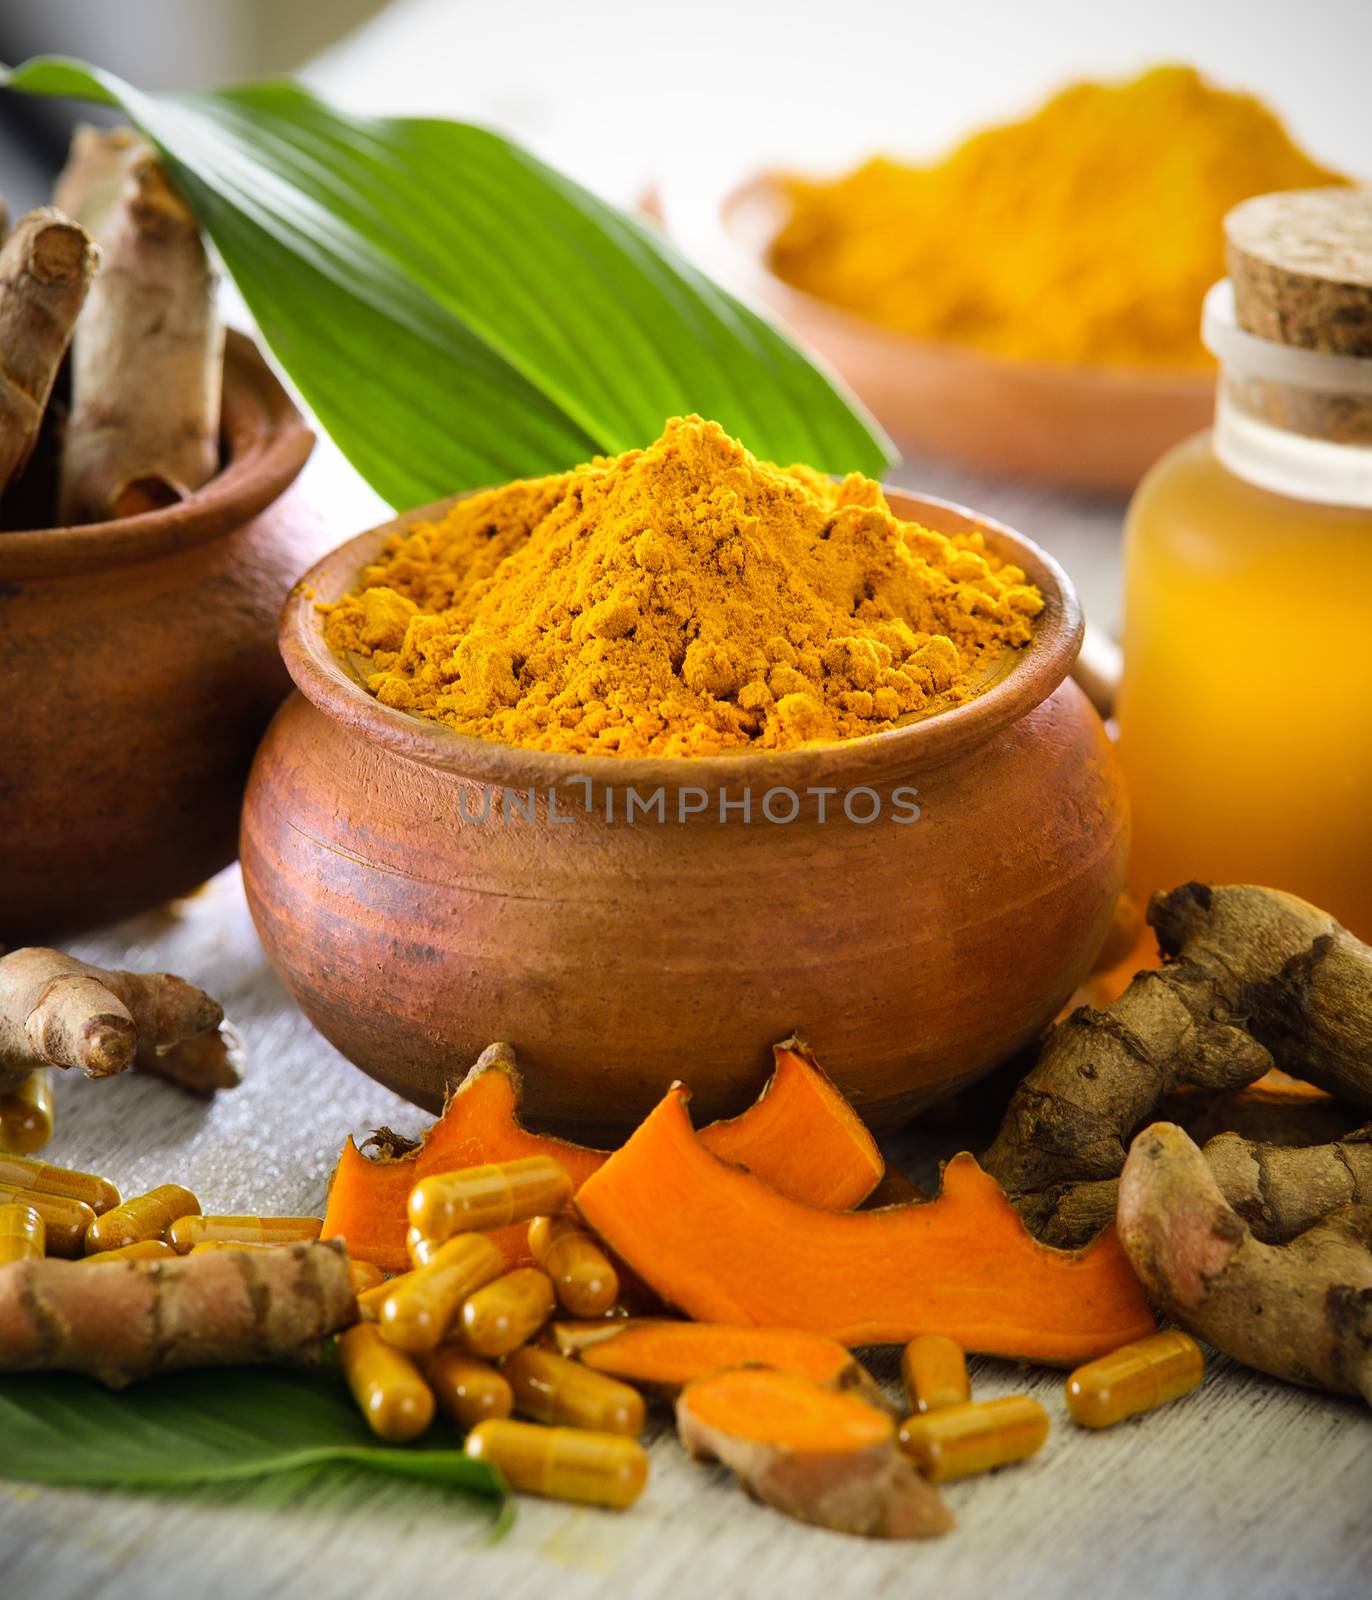 Turmeric powder and turmeric capsules on wooden background by sommai